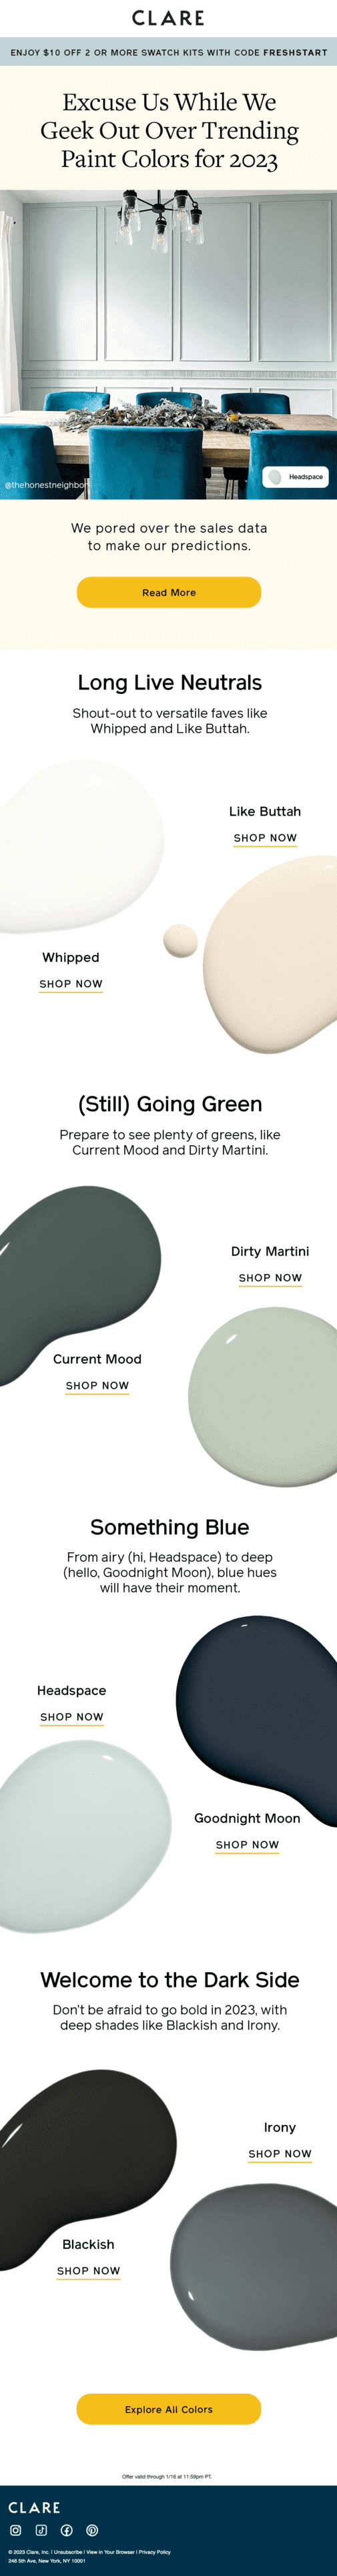 A Clare email trending paint colors for 2023 including neutrals, blues, and darks